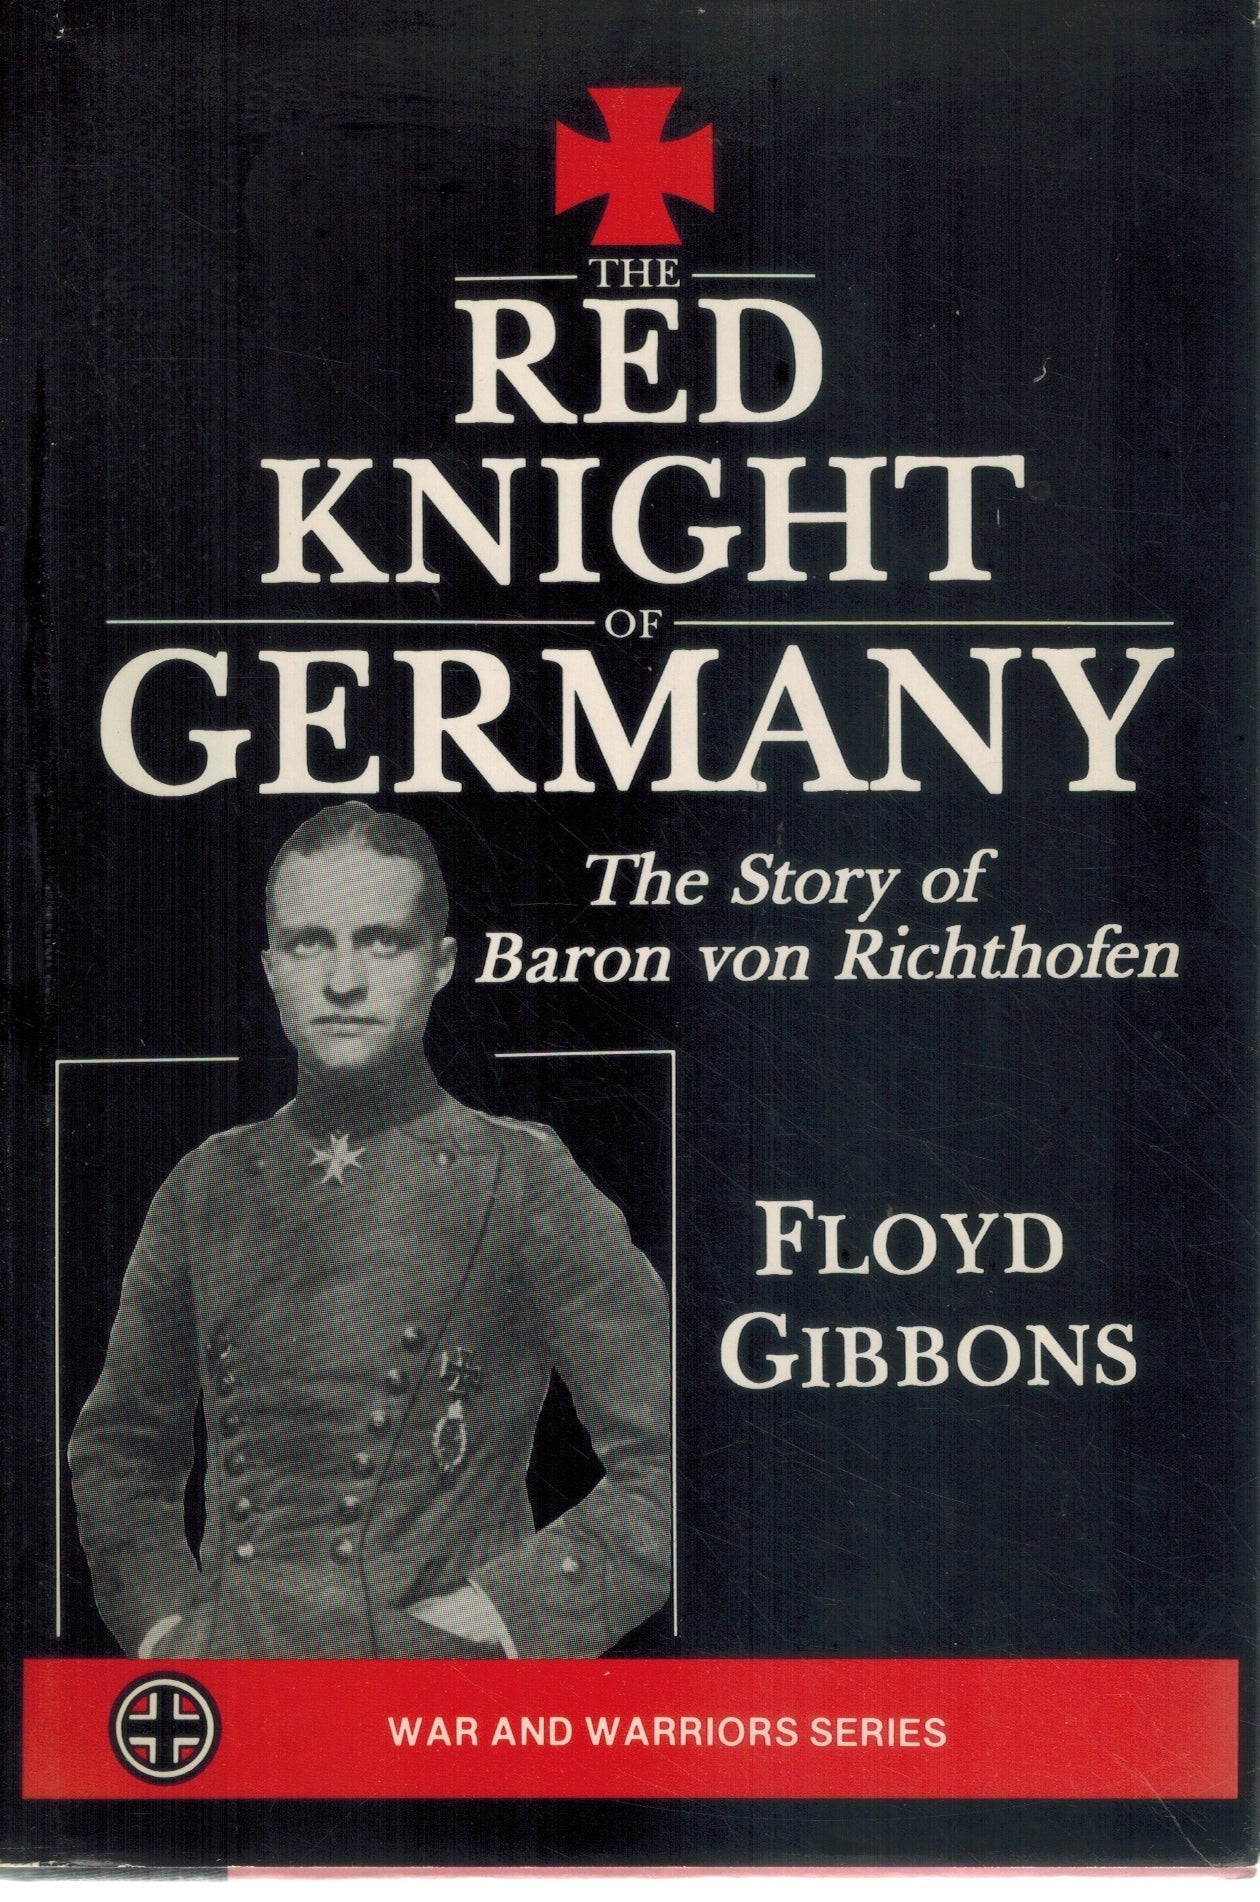 THE RED KNIGHT OF GERMANY